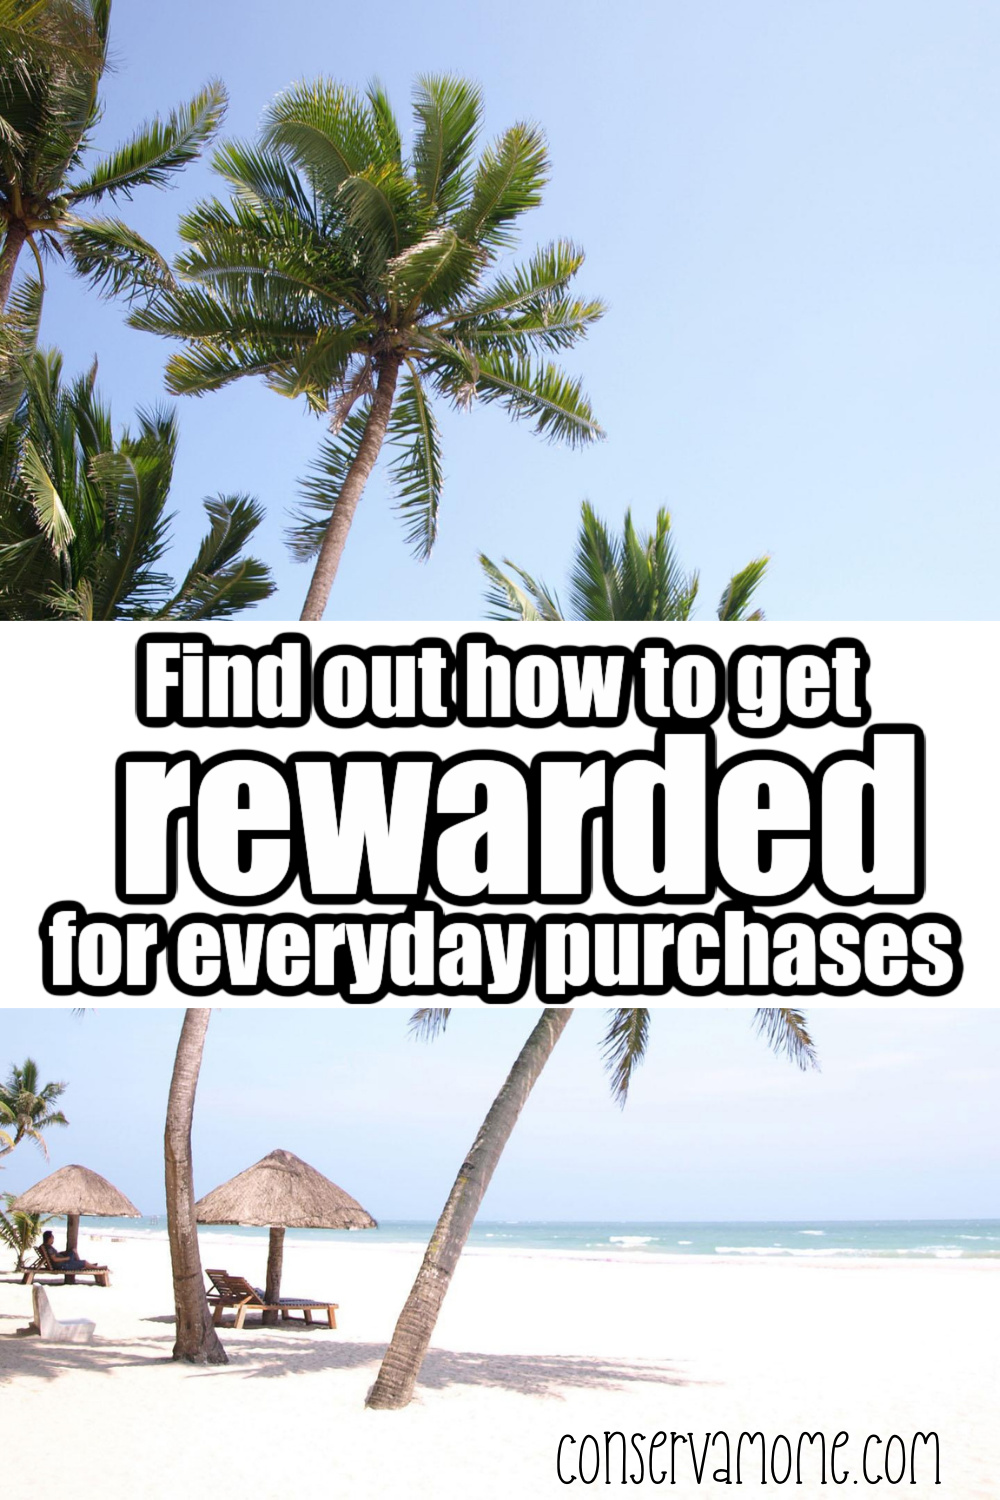 Find out how to get rewarded for everyday purchases